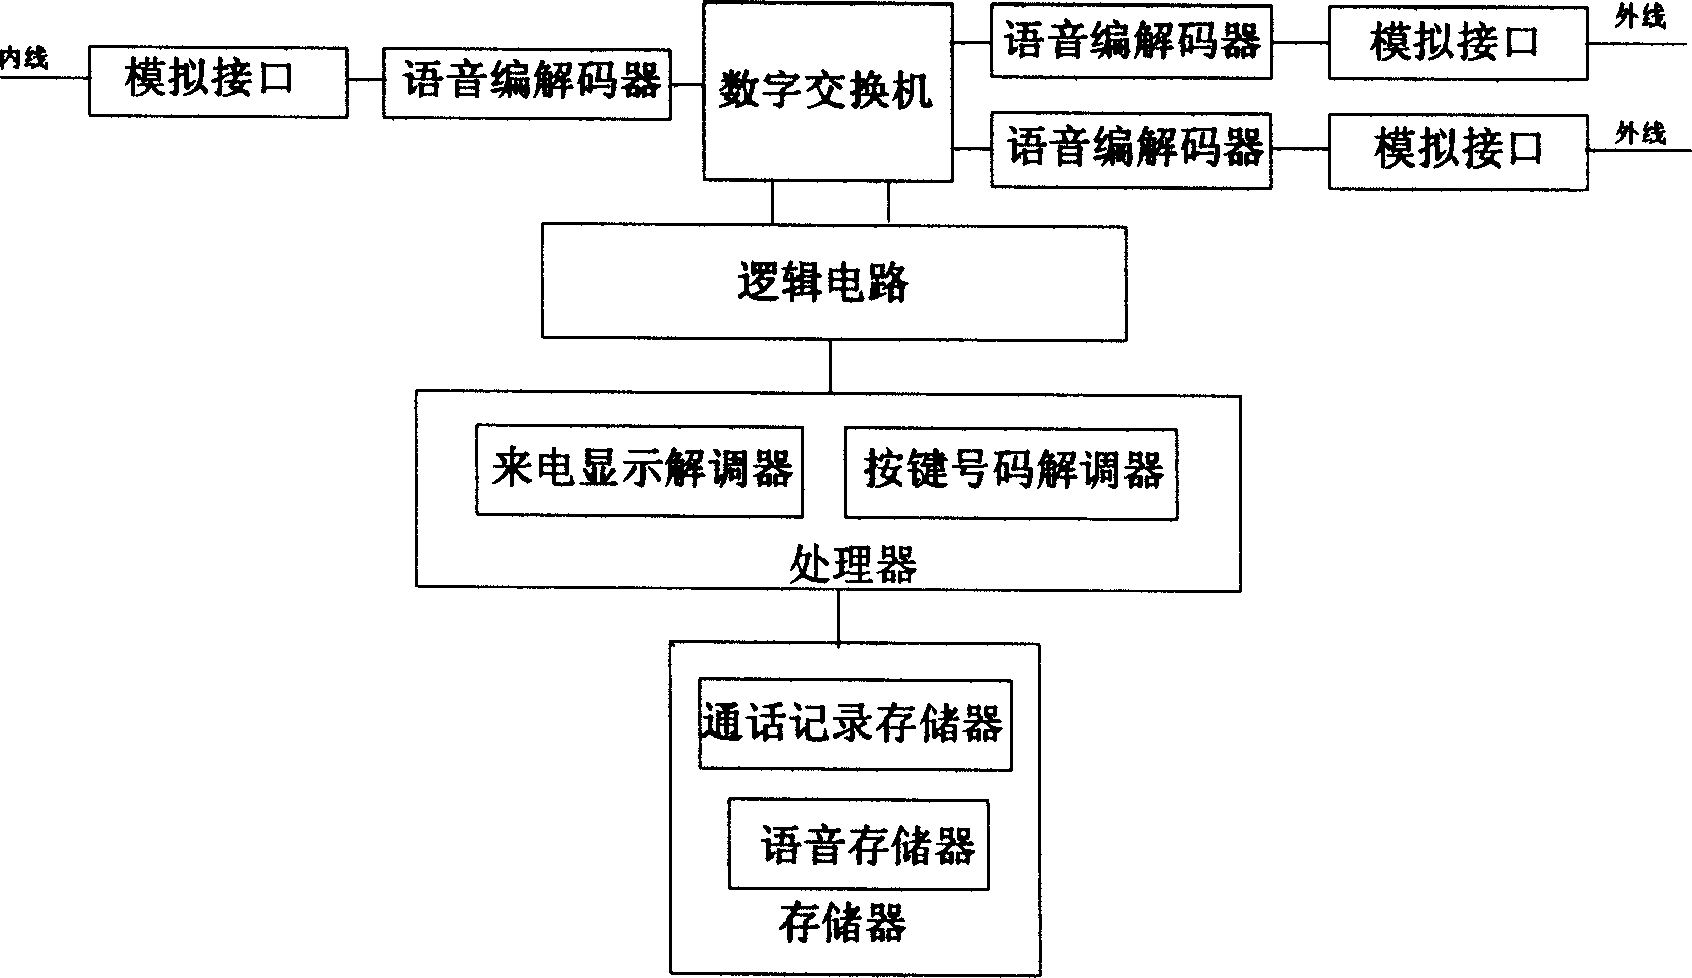 Method for instantly getting extension telephone by recalling group telephone exchange